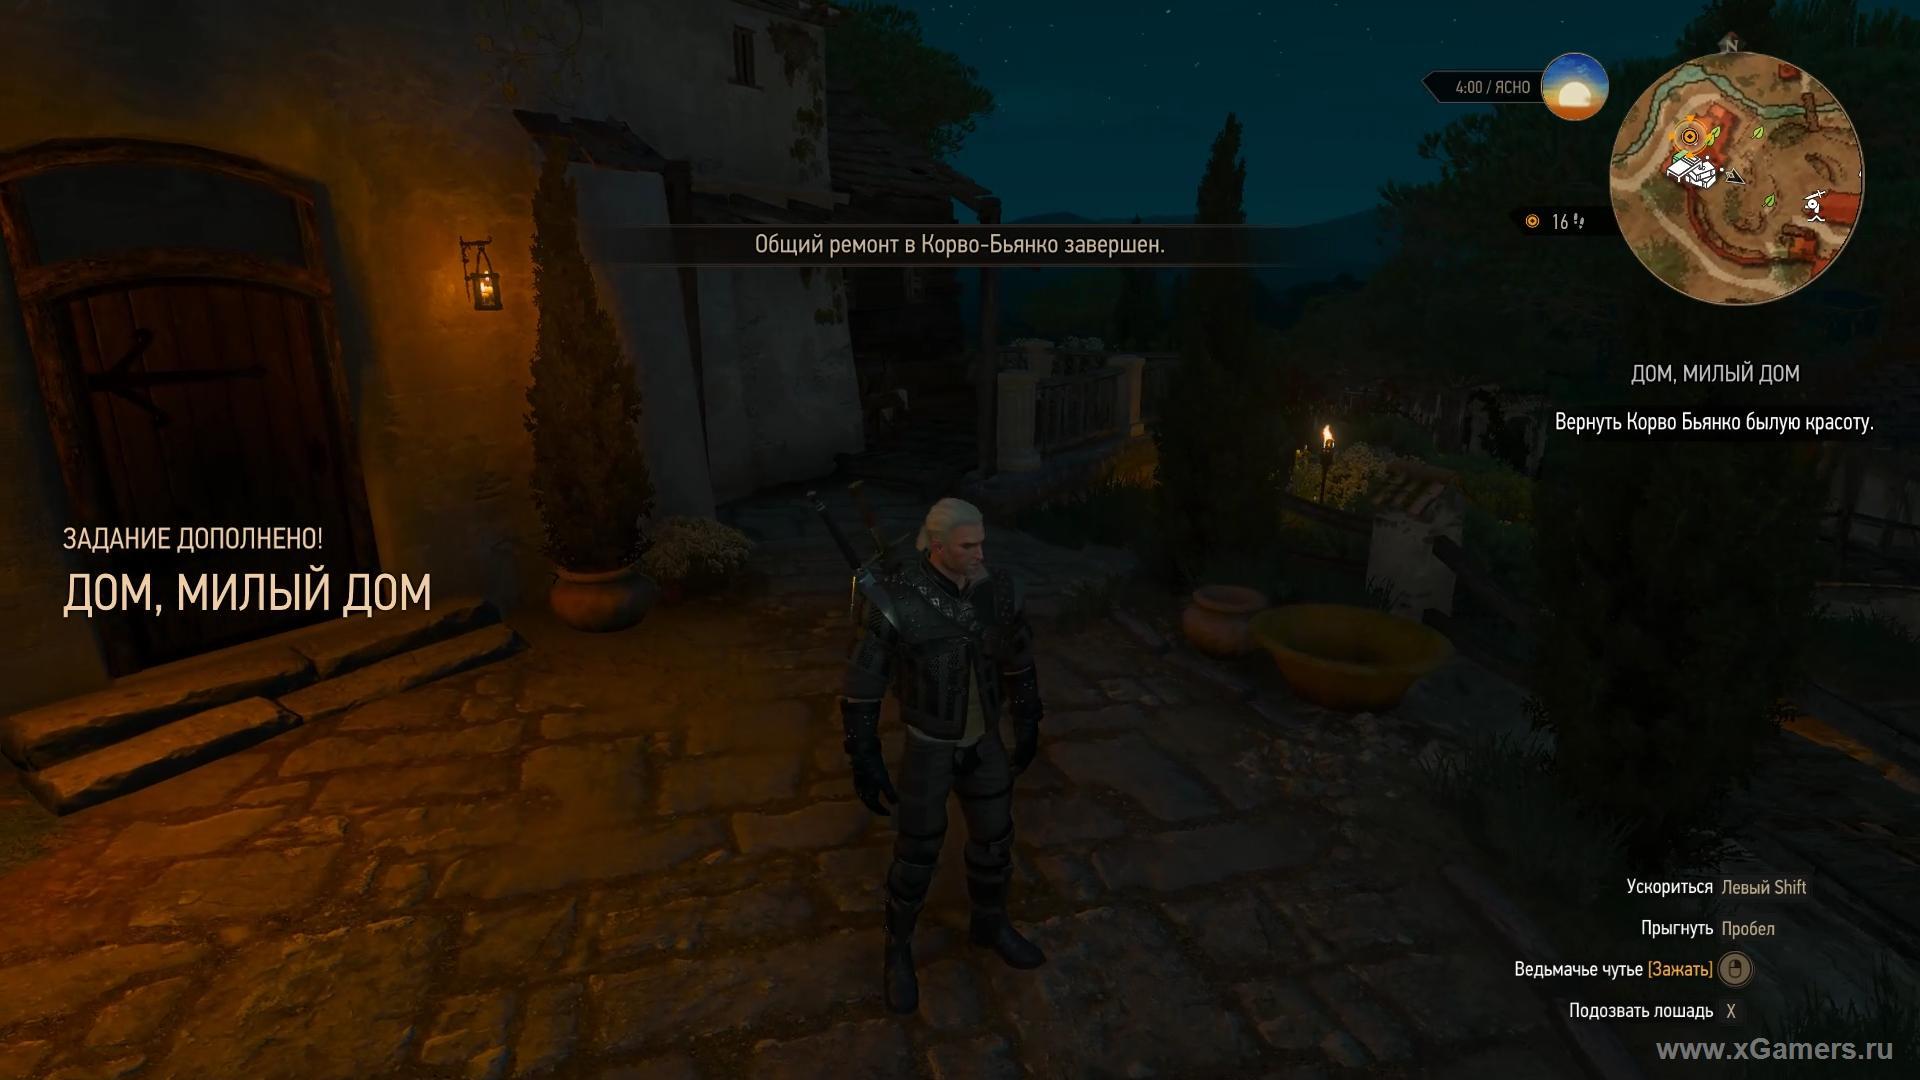 The Witcher Corvo Bianco: Review, Construction and Trophies